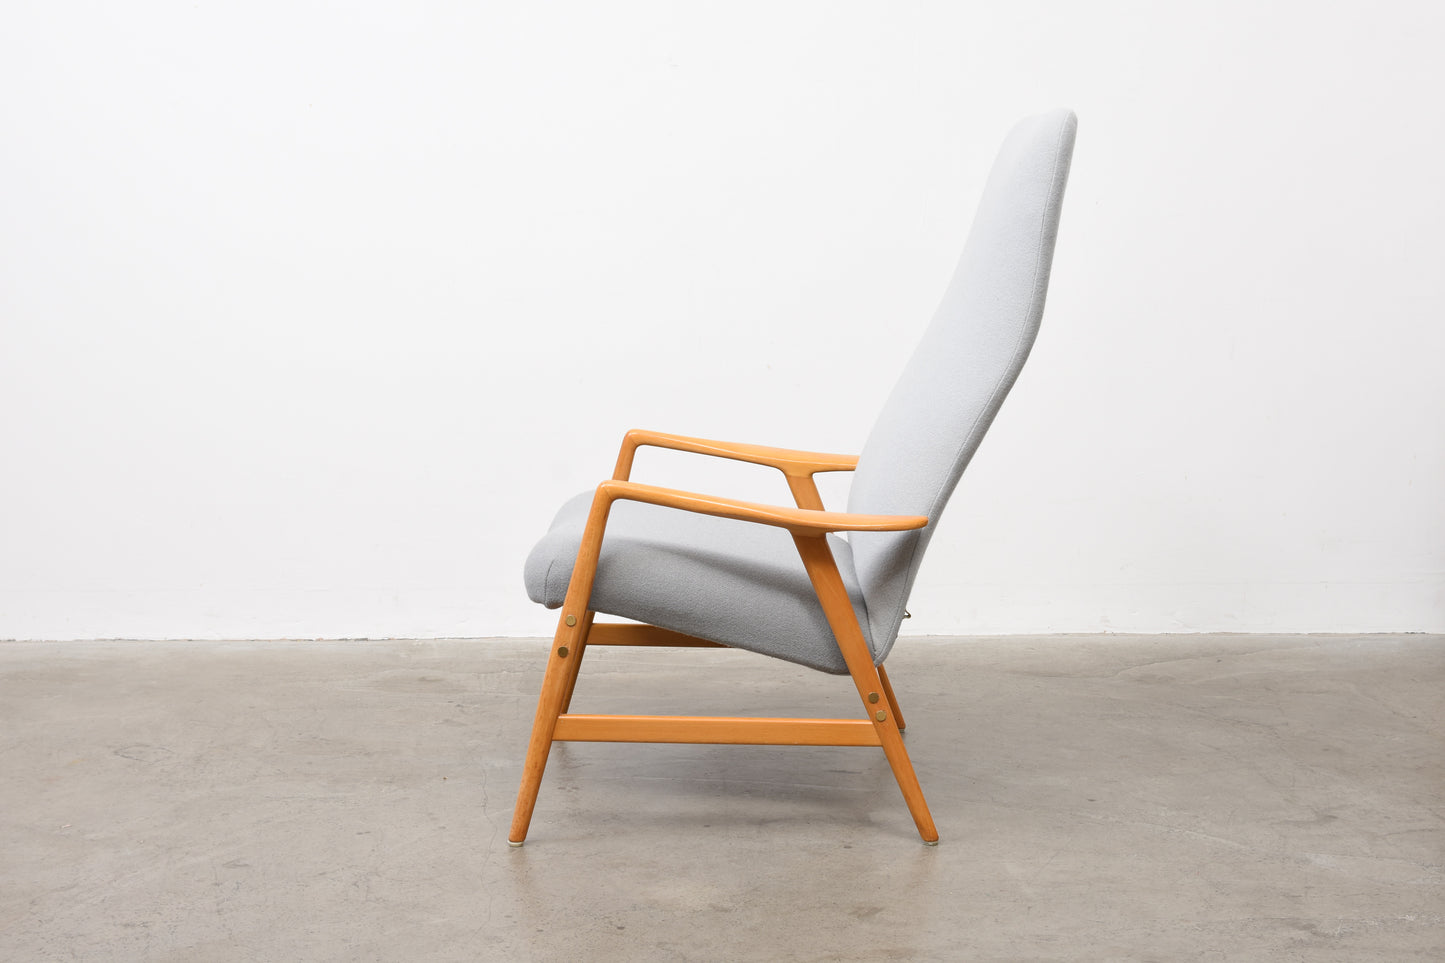 Reclining lounger by Alf Svensson